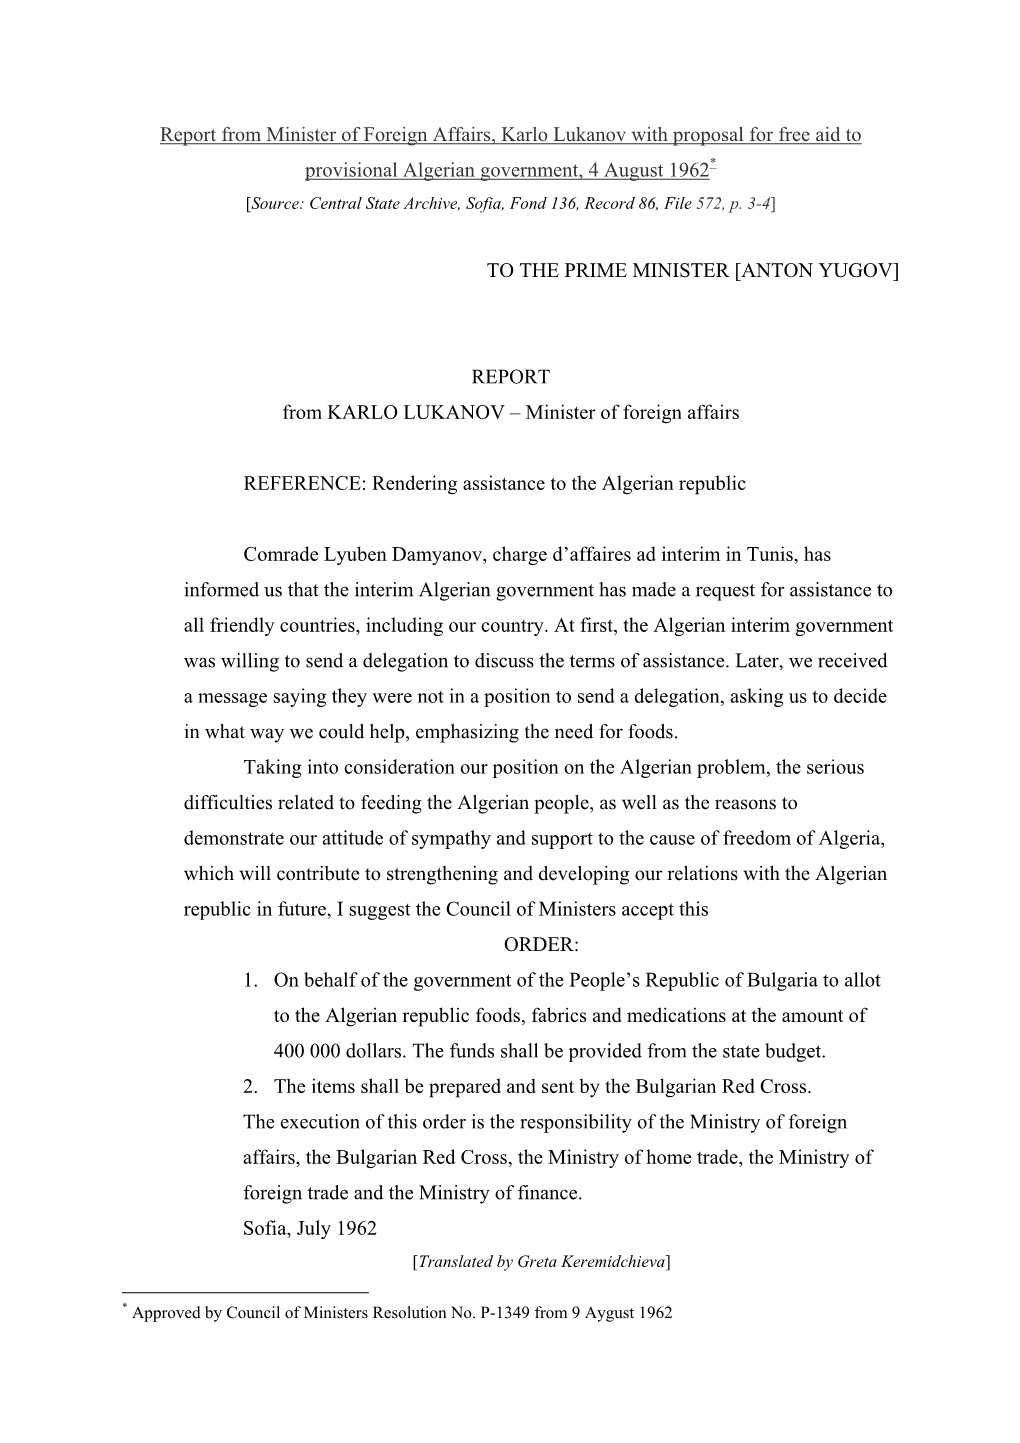 Report from Minister of Foreign Affairs, Karlo Lukanov with Proposal